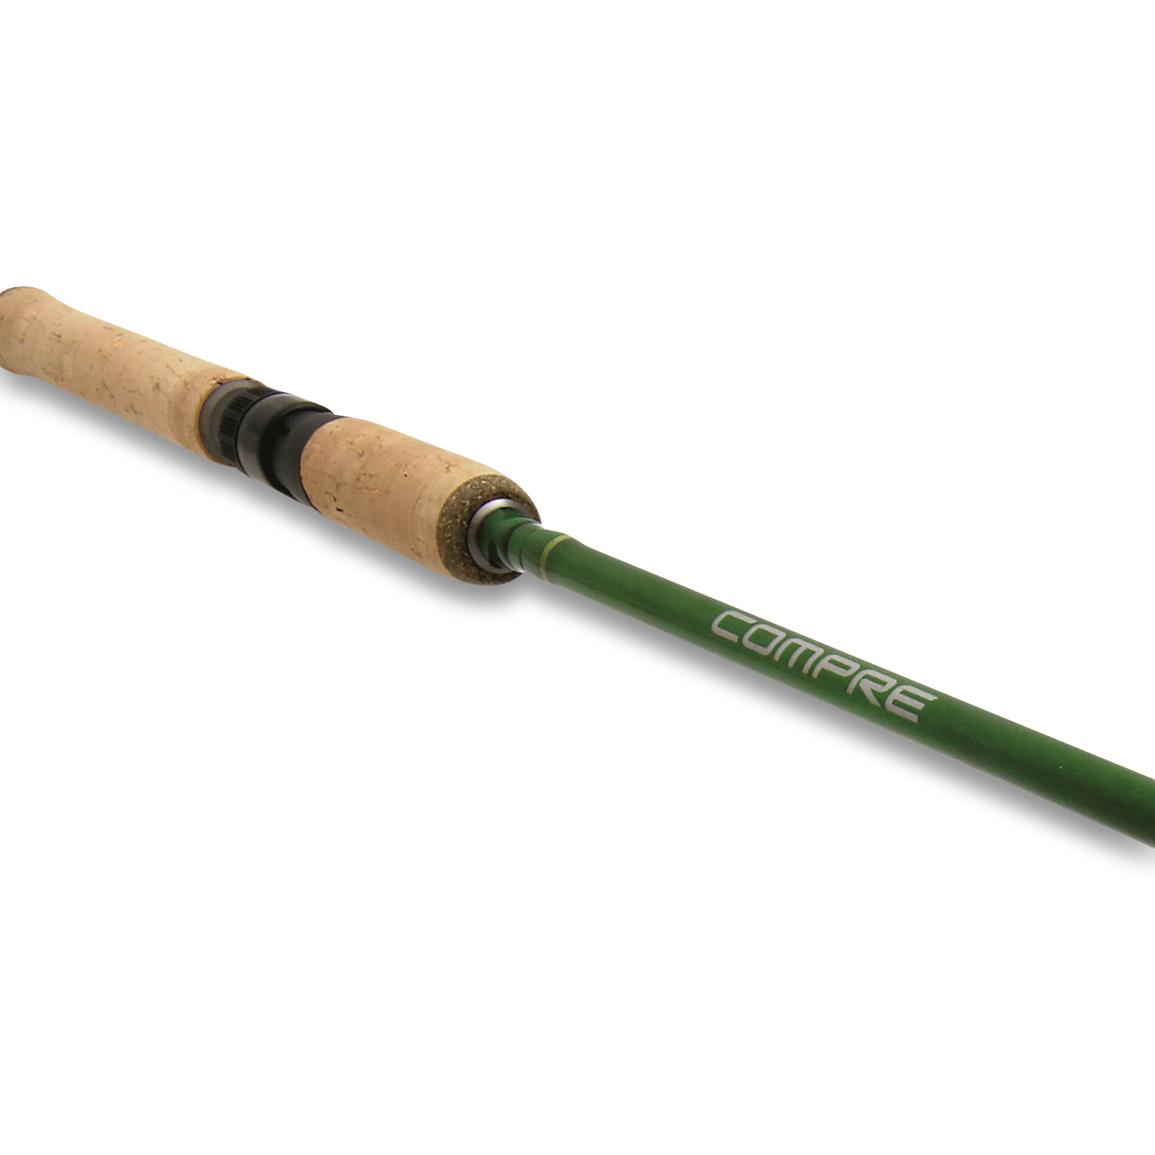 Shimano Compre Walleye Spinning Rod, 6' Length, Medium Light Power, Extra Fast Action